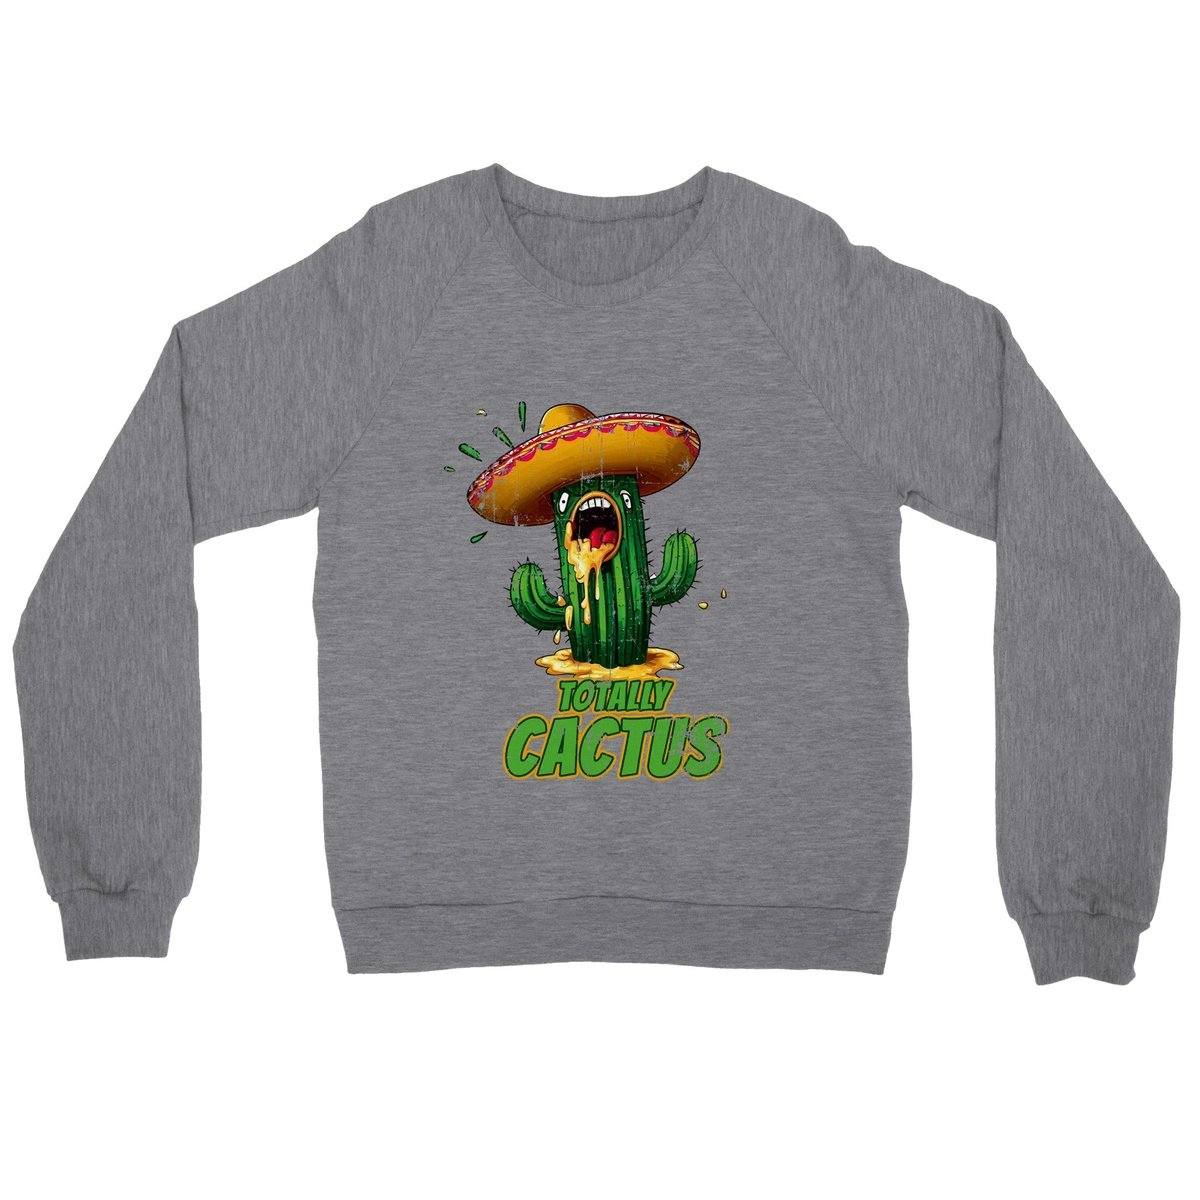 Totally Cactus Jumper Australia Online Color Heather Gray / S